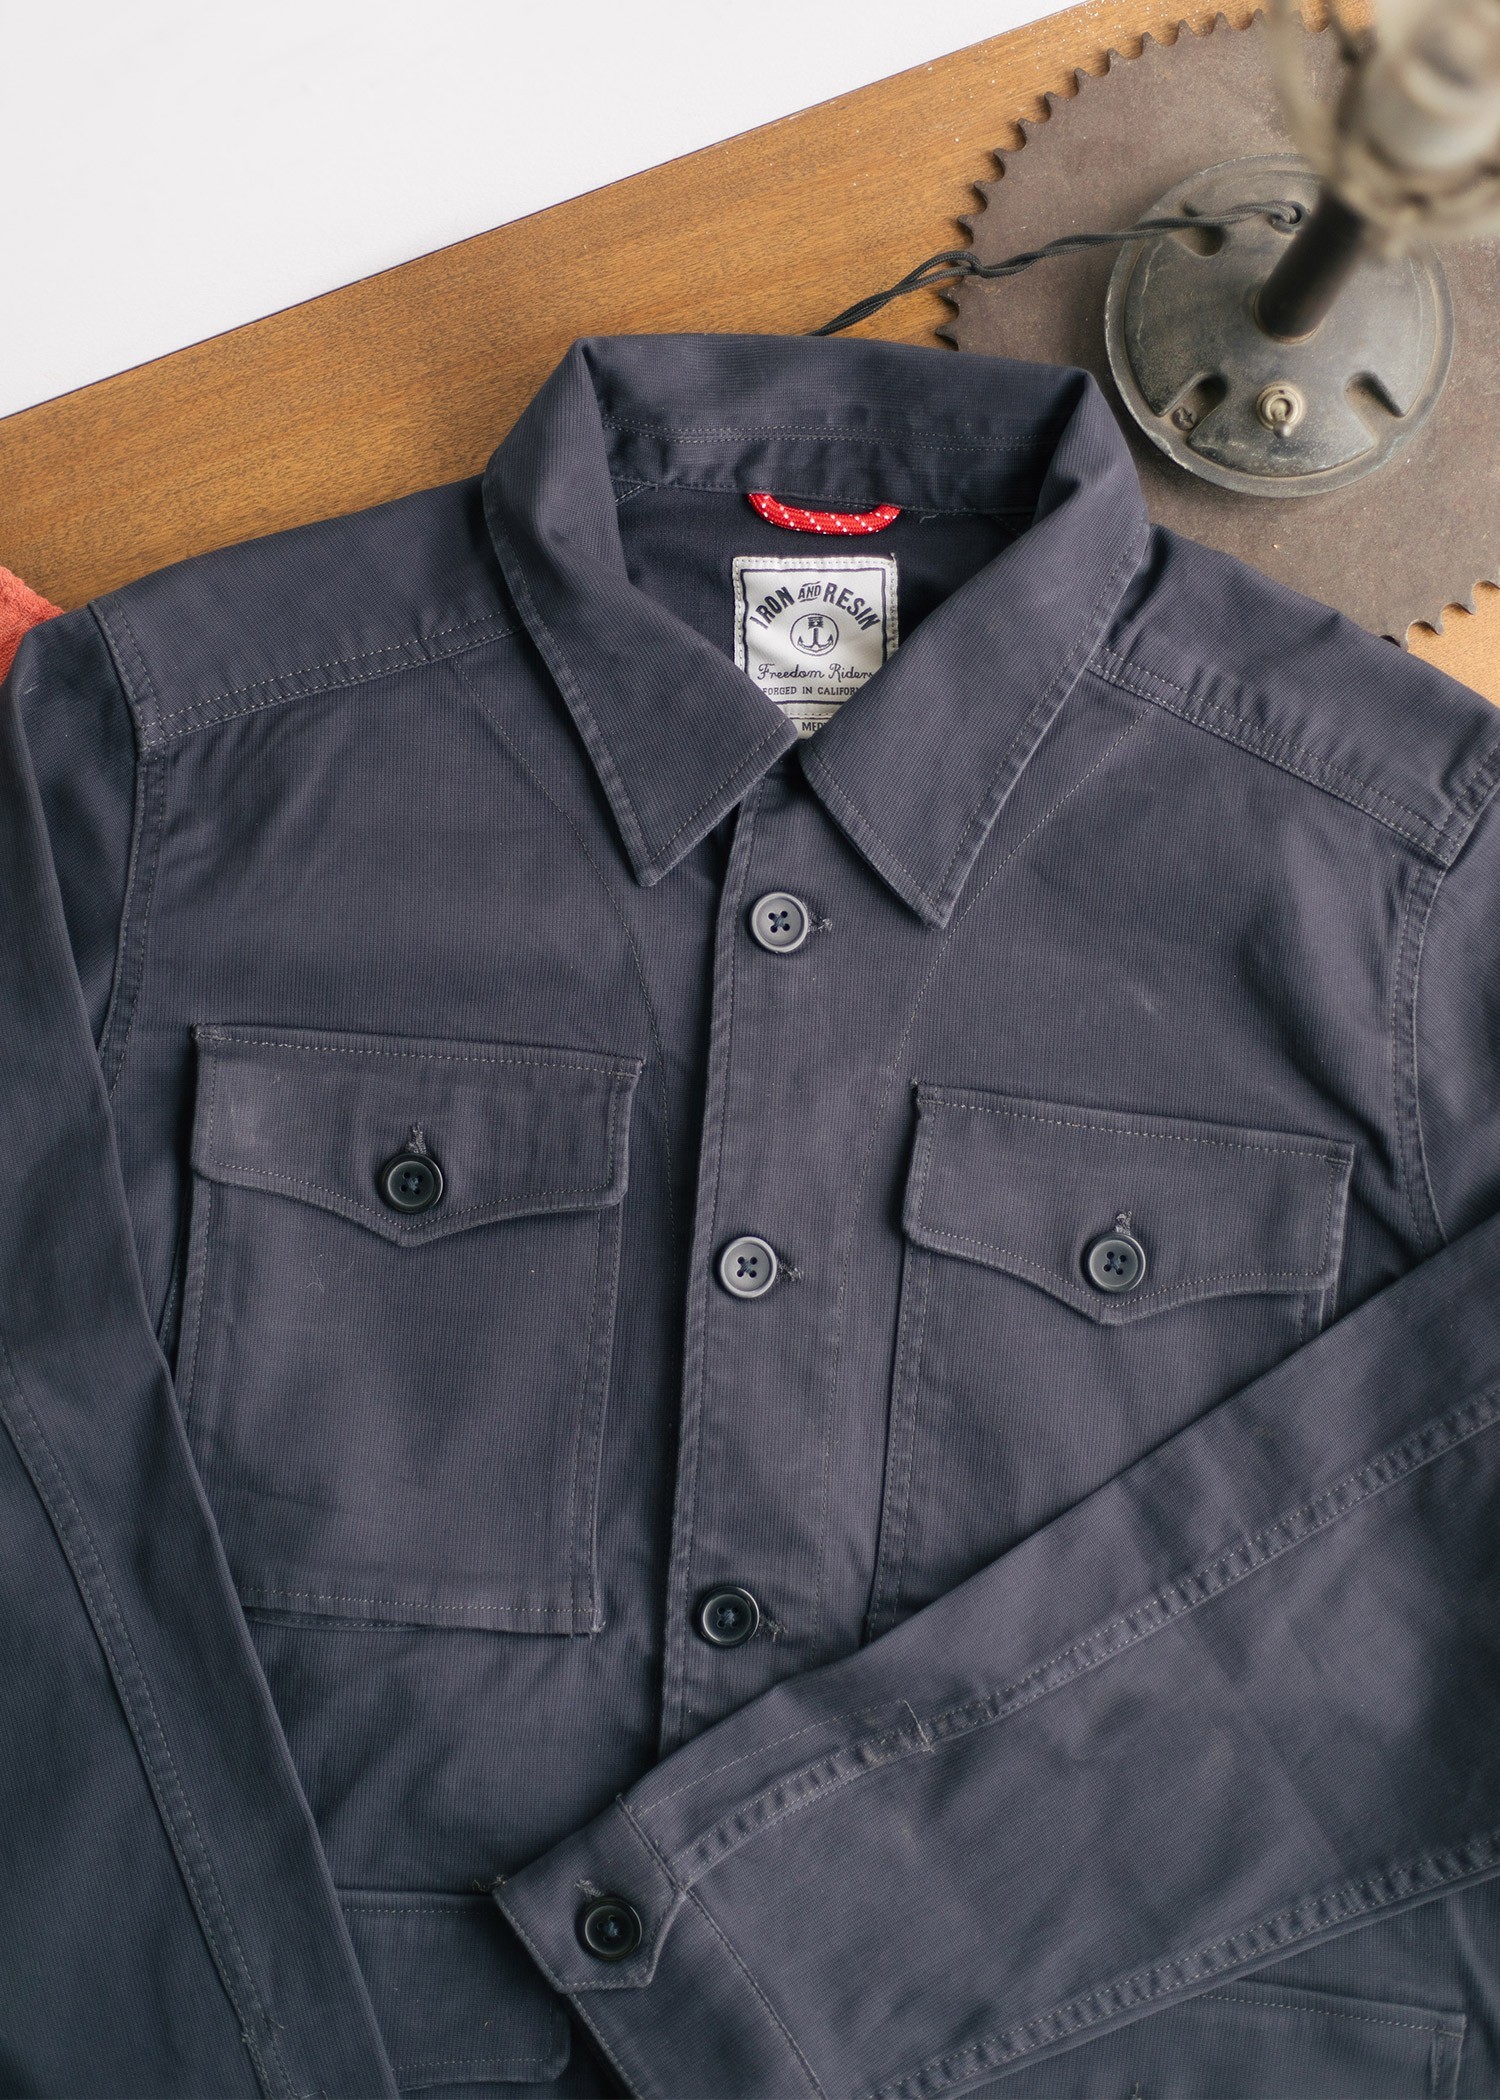 Military Bedford Cord Jacket - Iron and Resin